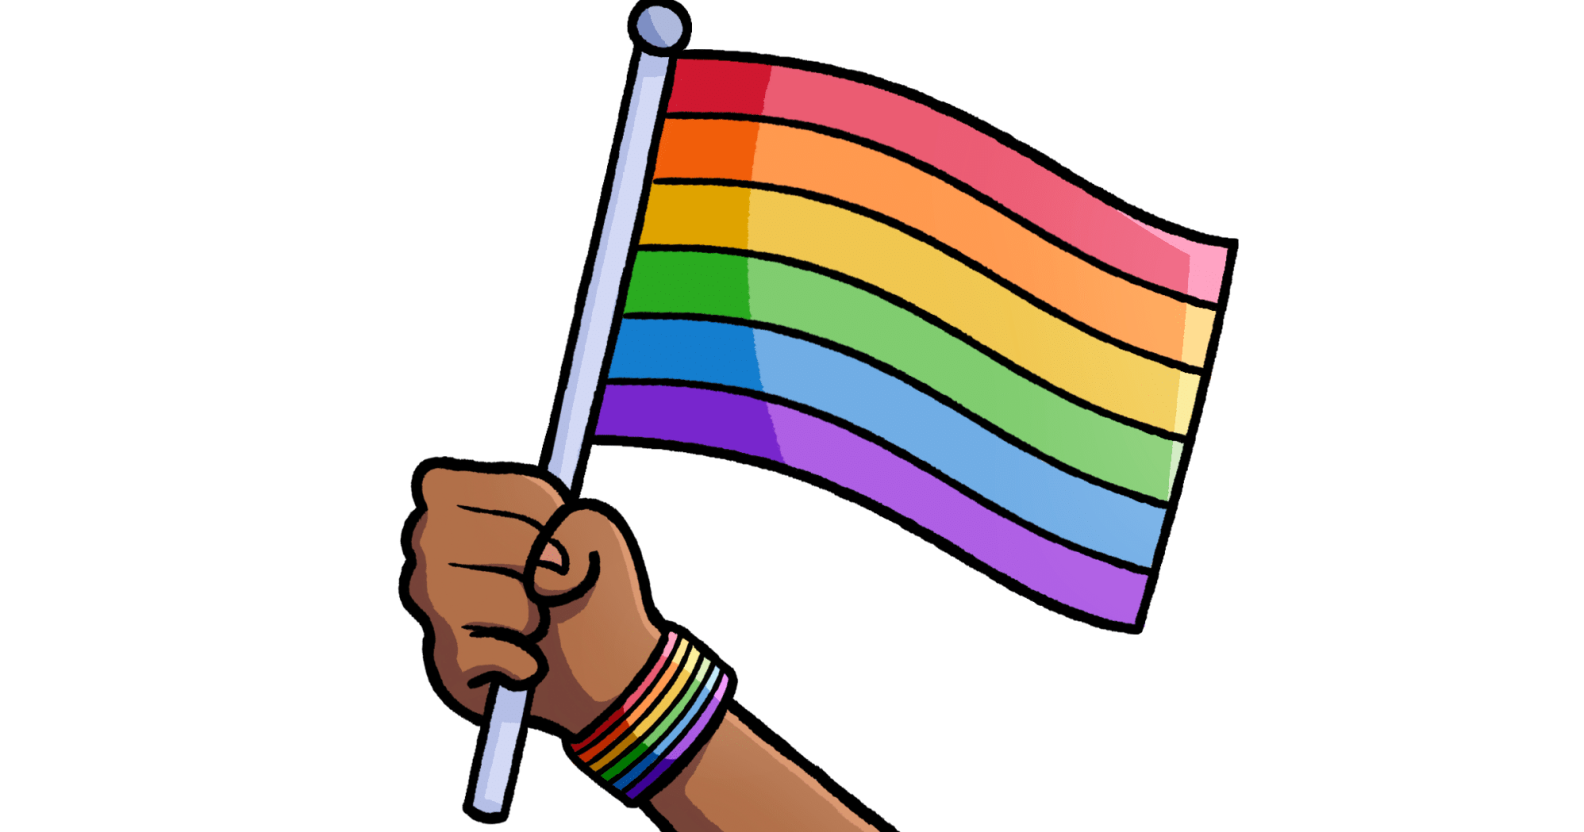 Illustrated rainbow pride flag on a white background.